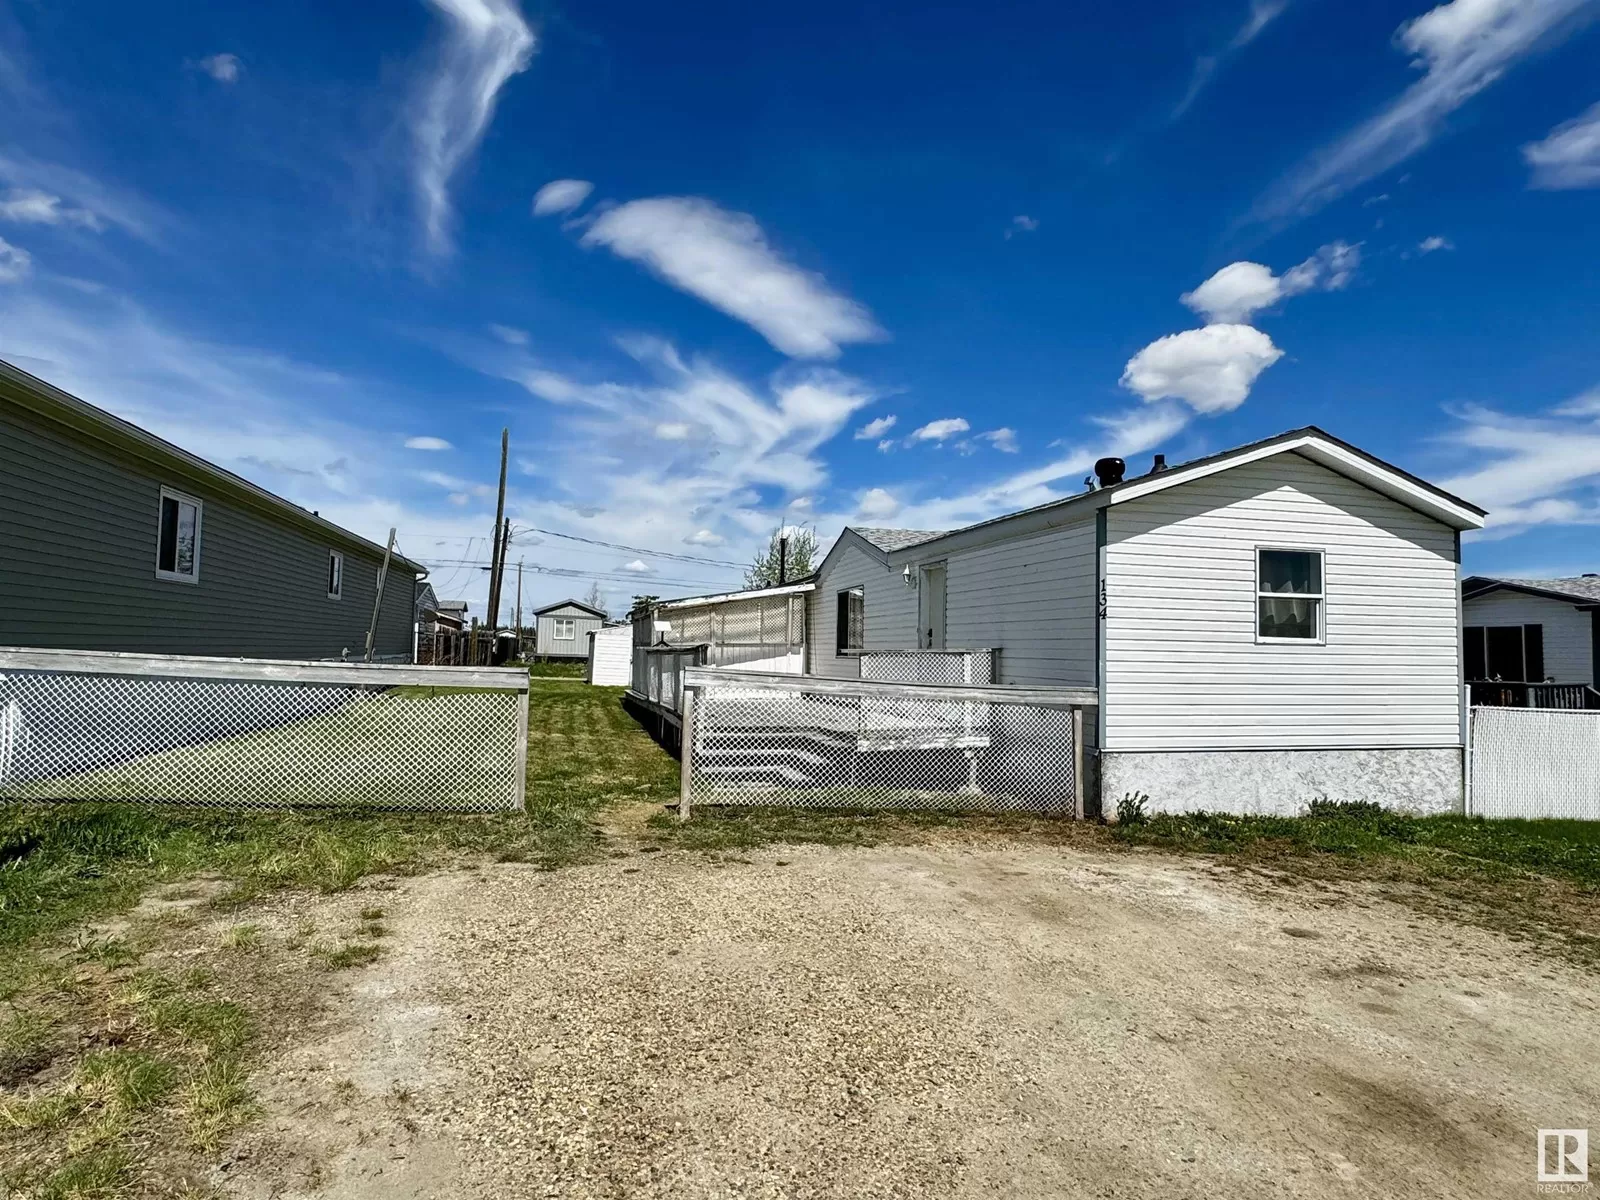 Mobile Home for rent: 134 49321 Range Road 80, Drayton Valley, Alberta T7A 1L7